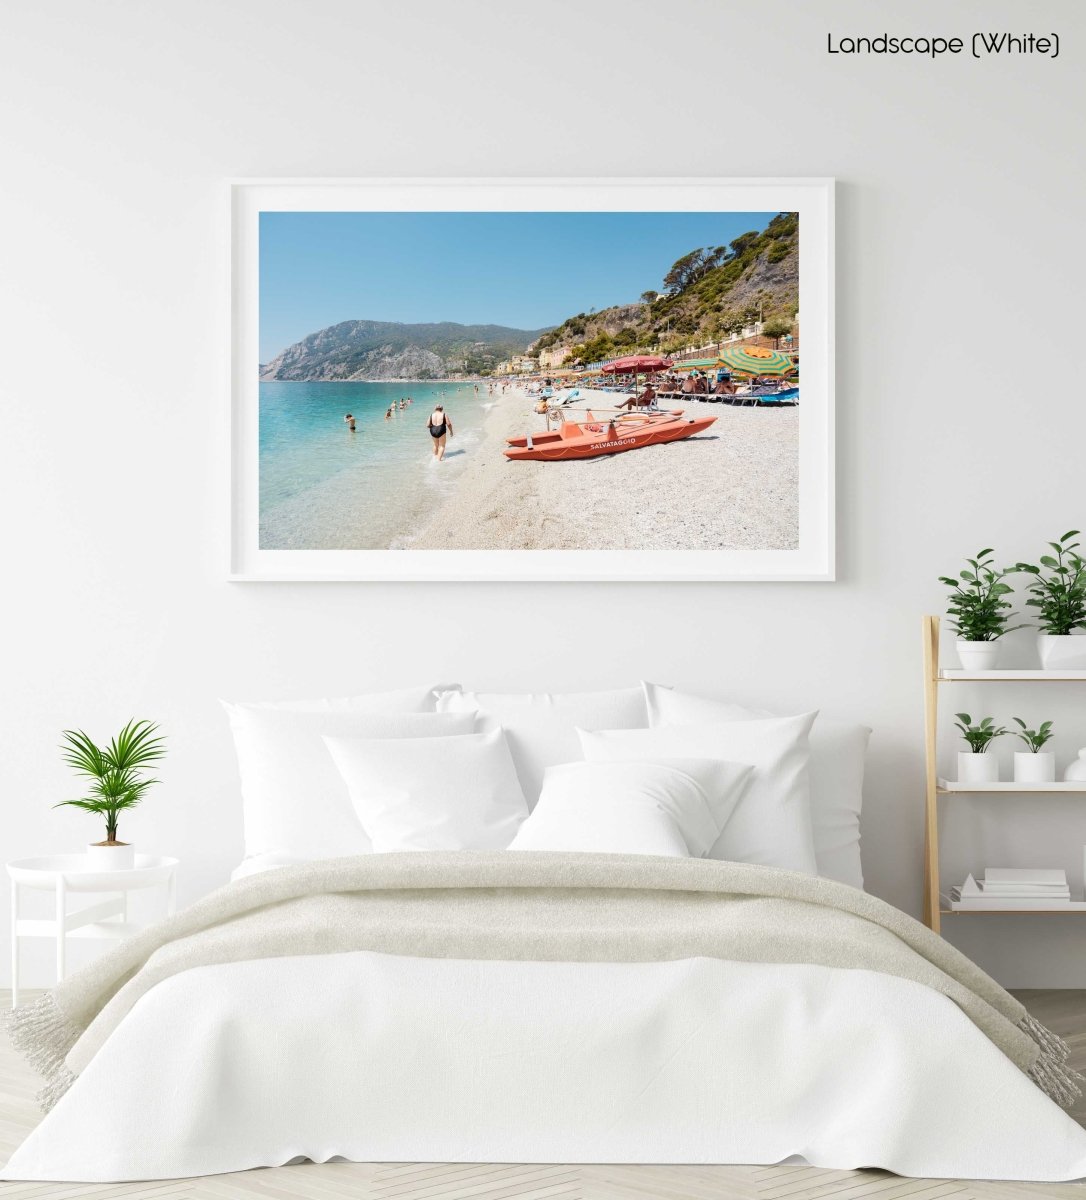 Italian vibes along Monterosso beach with people swimming and lying at water in a white fine art frame